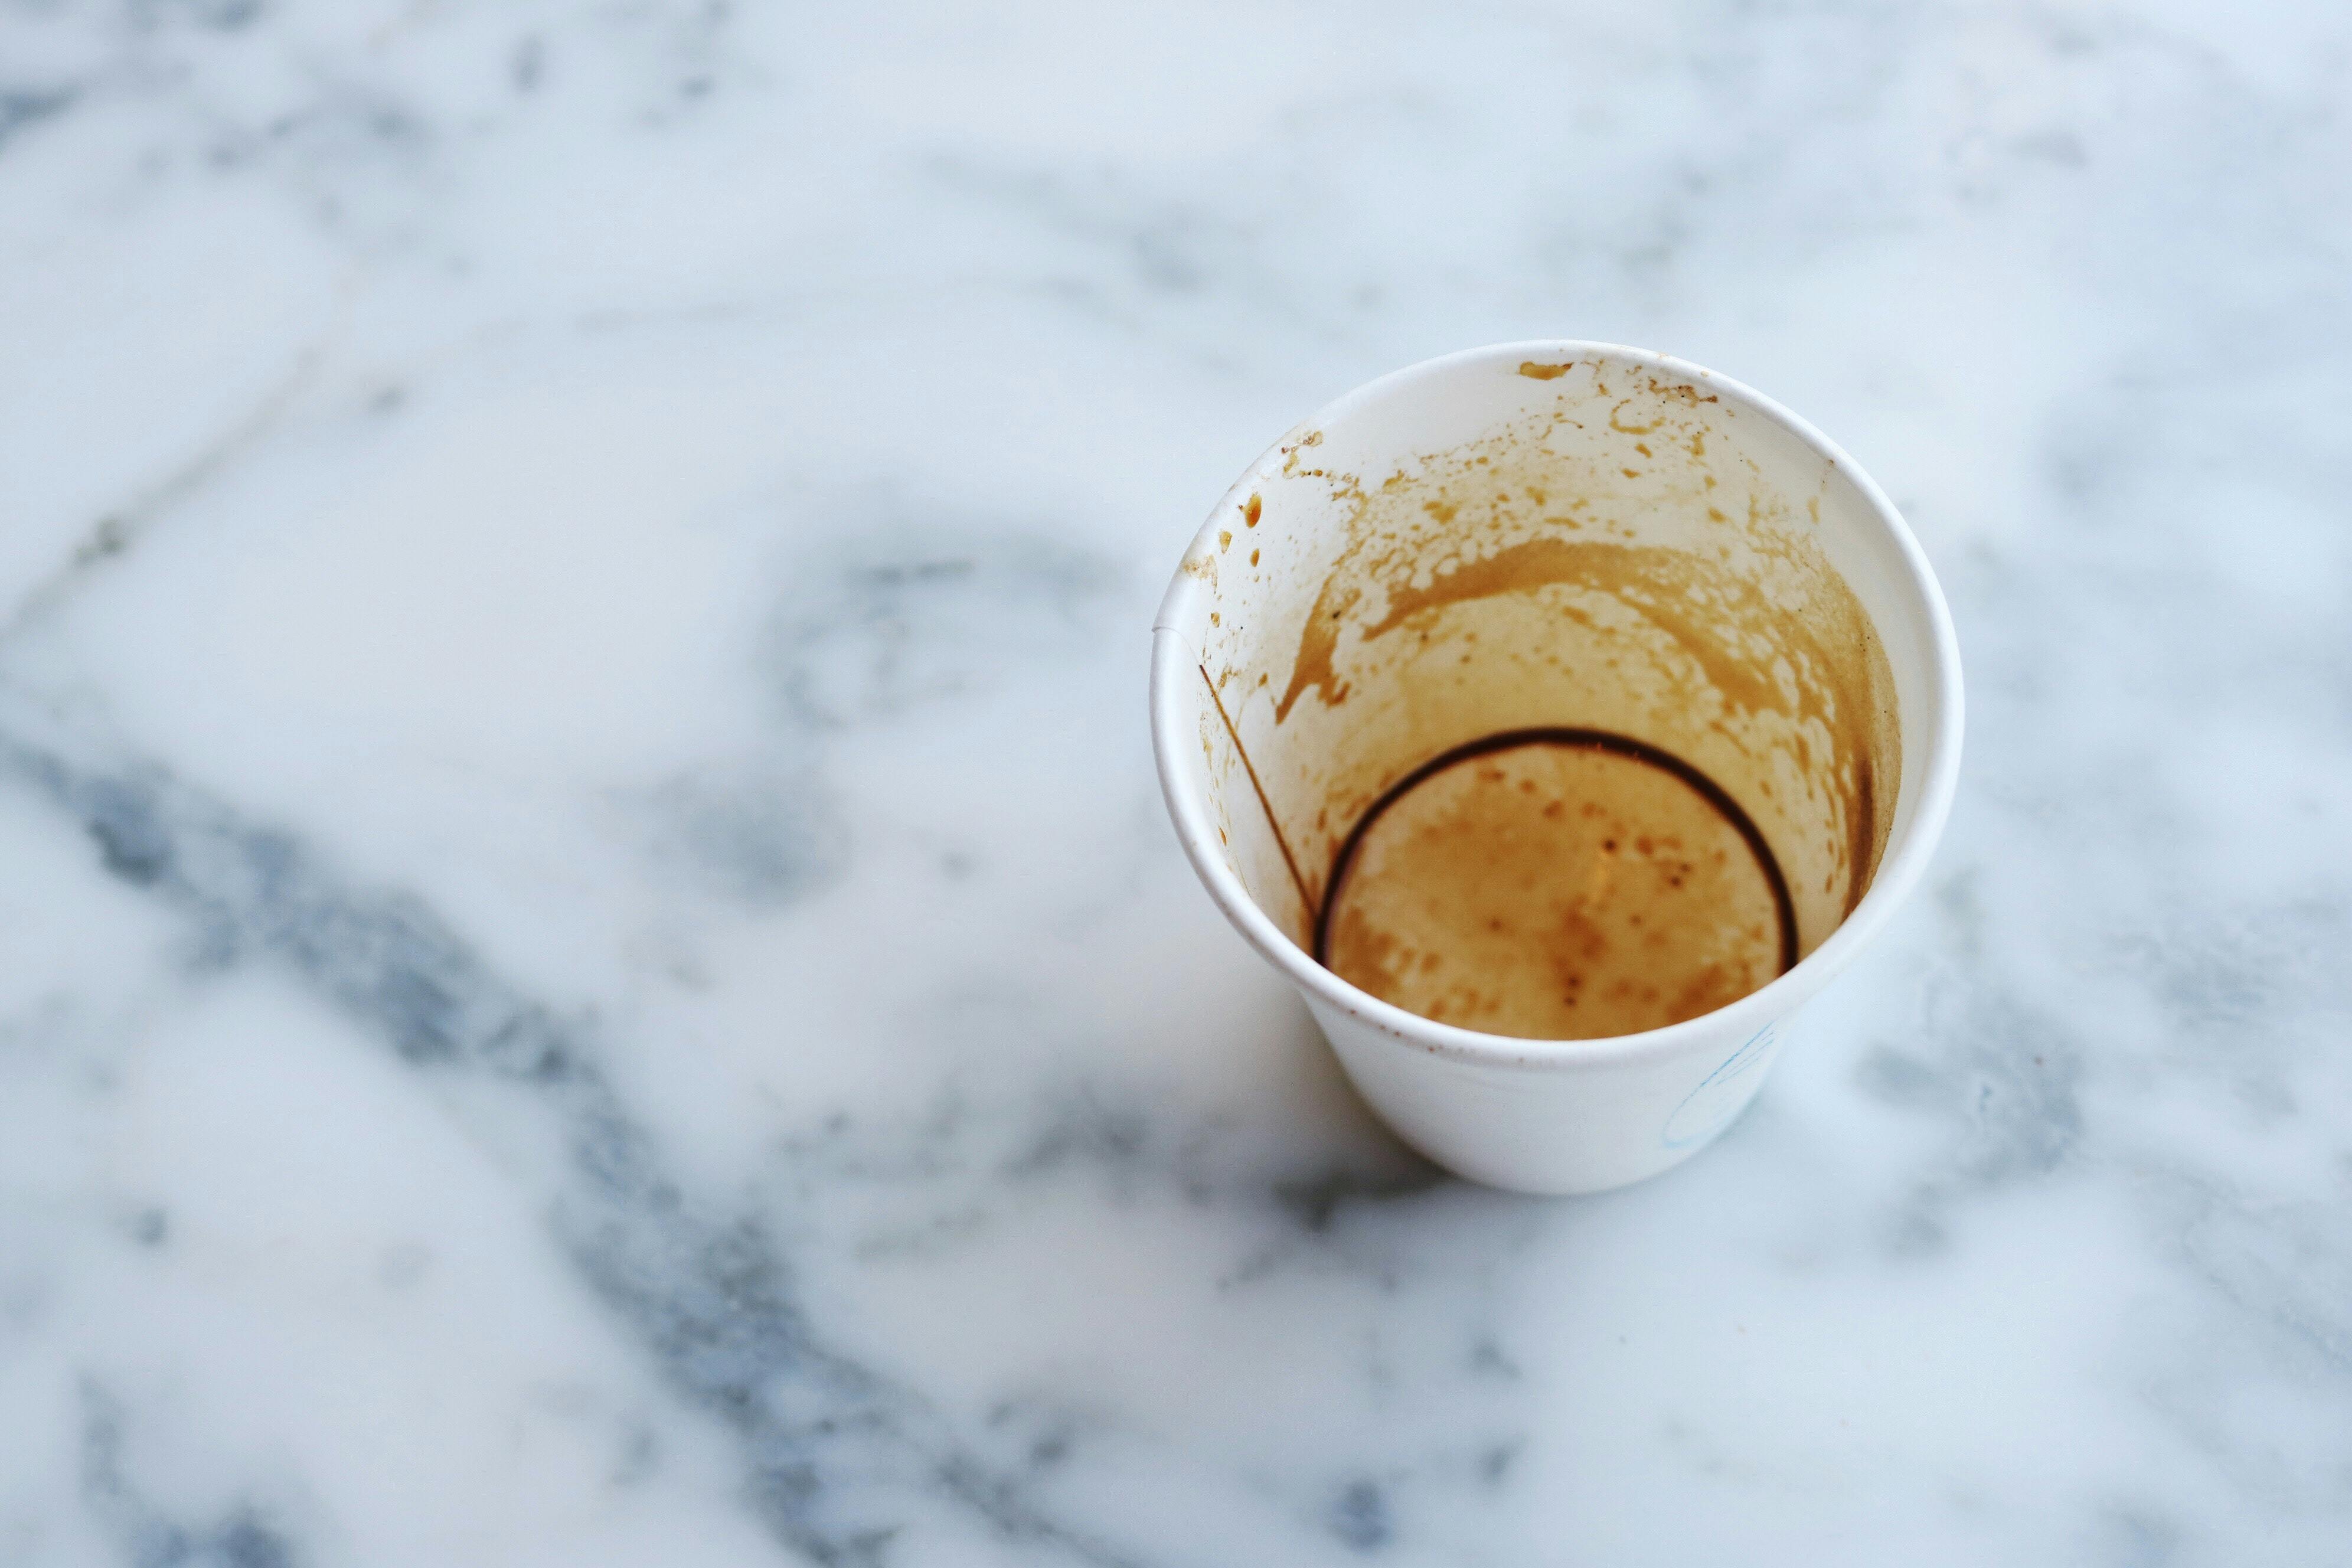 Empty paper coffee cup on grey and white marble surface